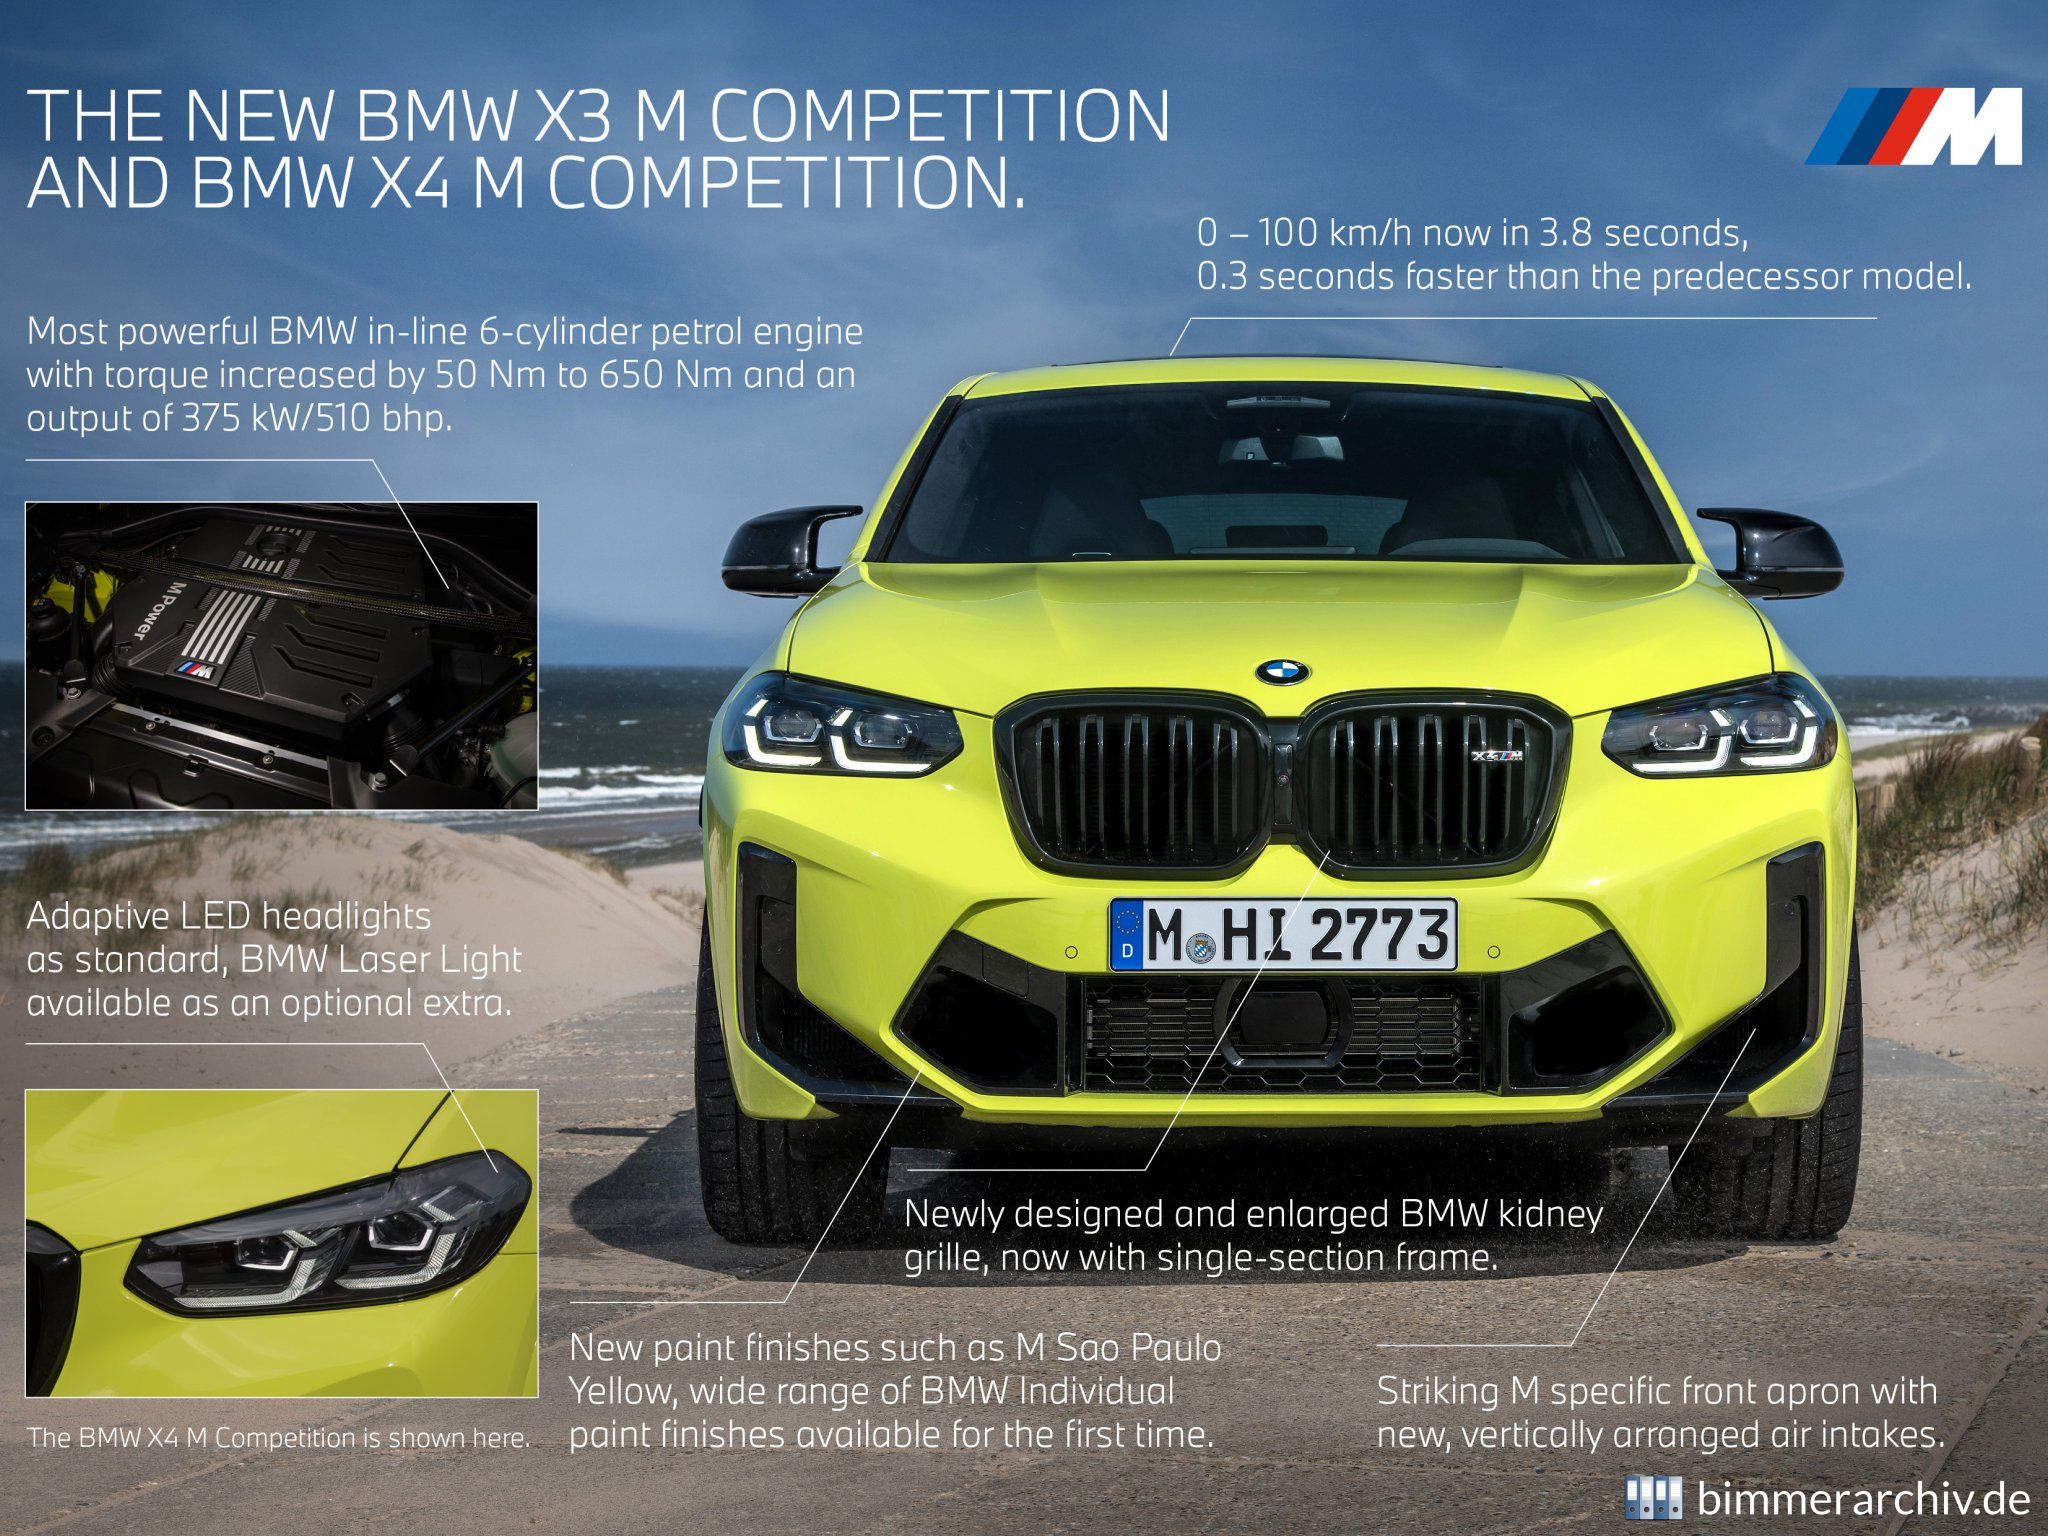 BMW X3 M and X4 M Competition - Highlights